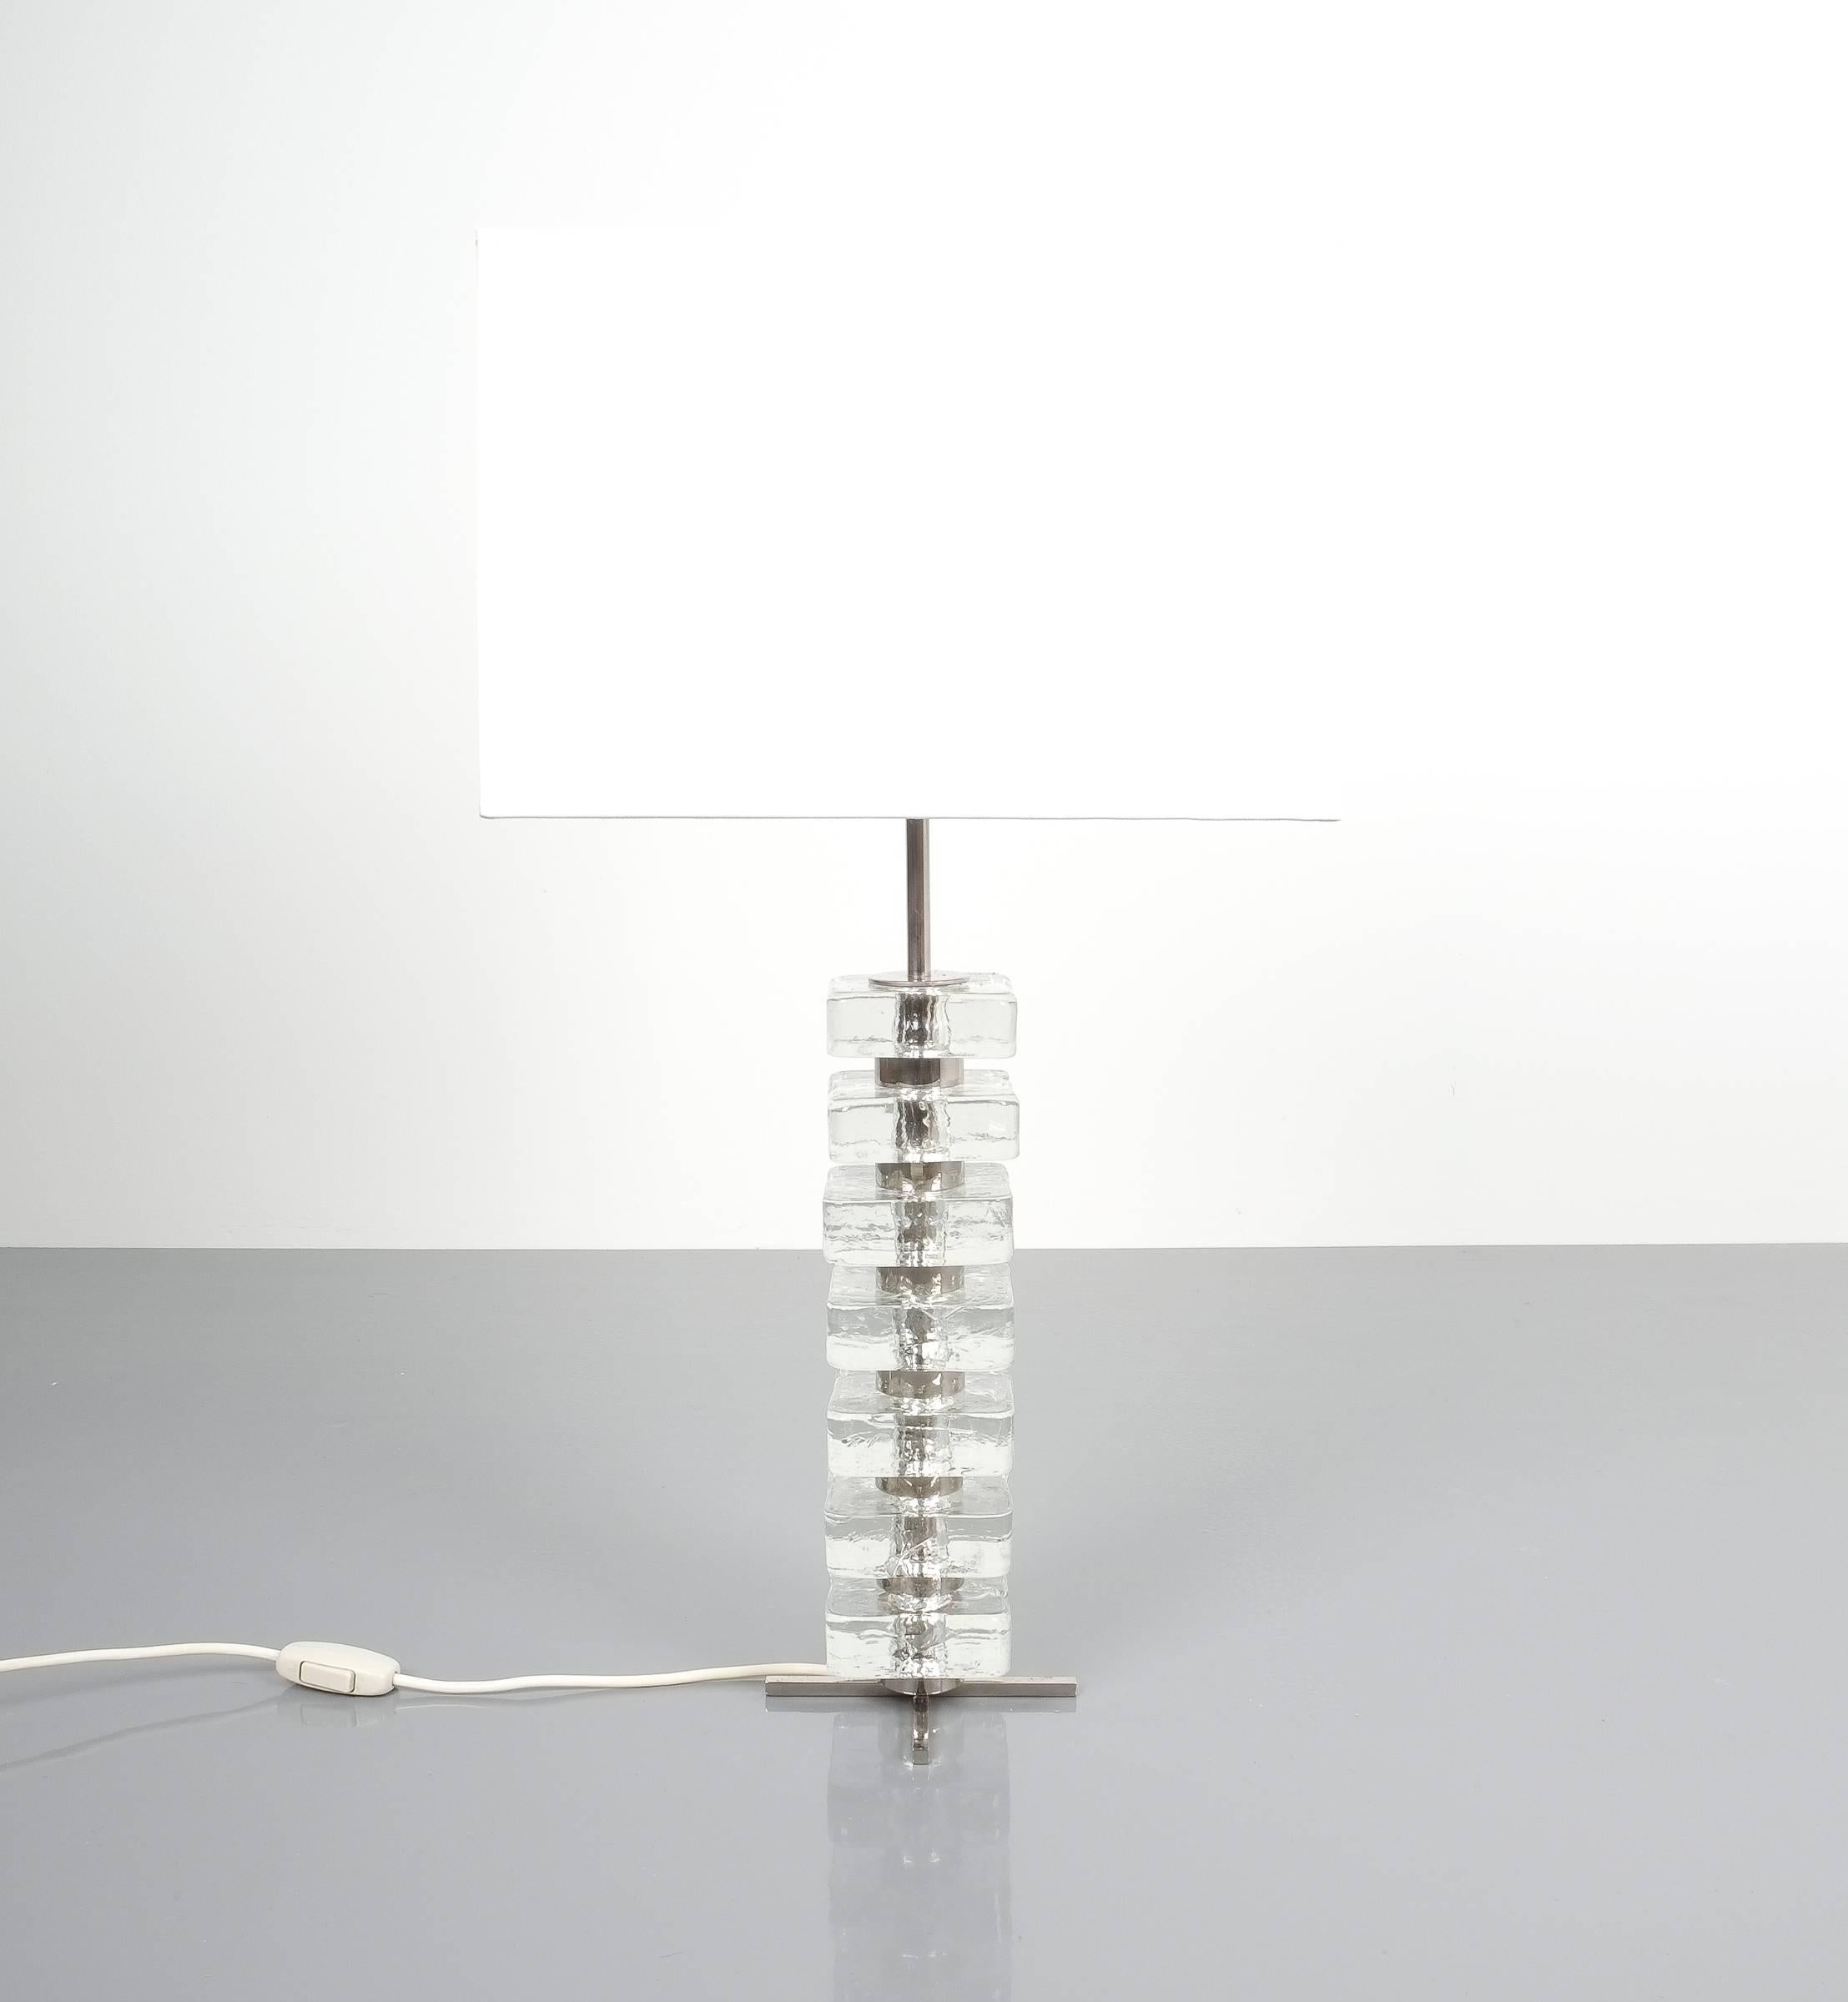 Bakalowits & Sohne square block glass table light large, Austria, 1960. Beautiful large table lamp by Bakalowits & Sohne Austria. The table light is composed of smooth and heavy stacked cast glass blocks and nickeled brass hardware. The light is in